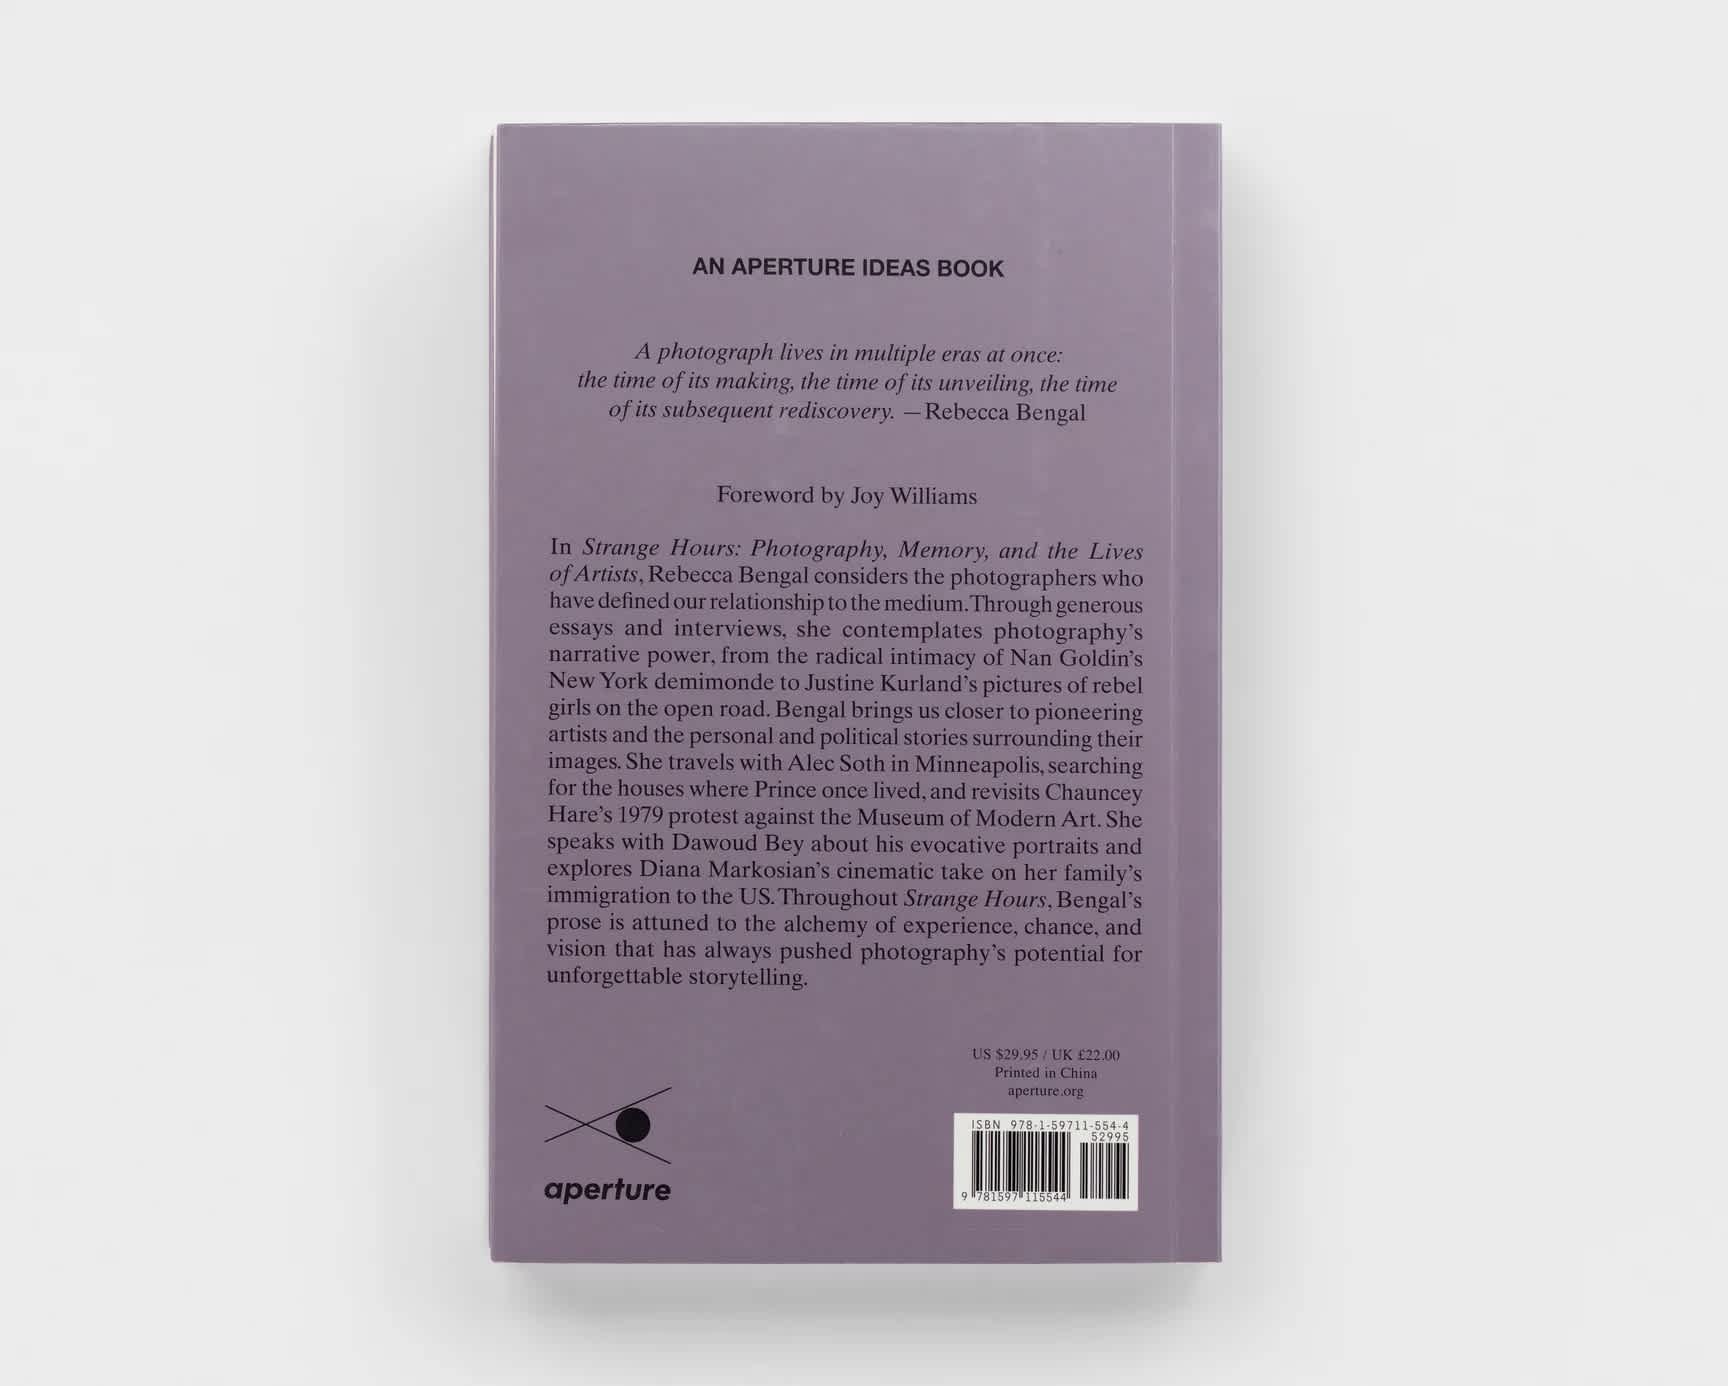 Back cover of a purple book with black text.